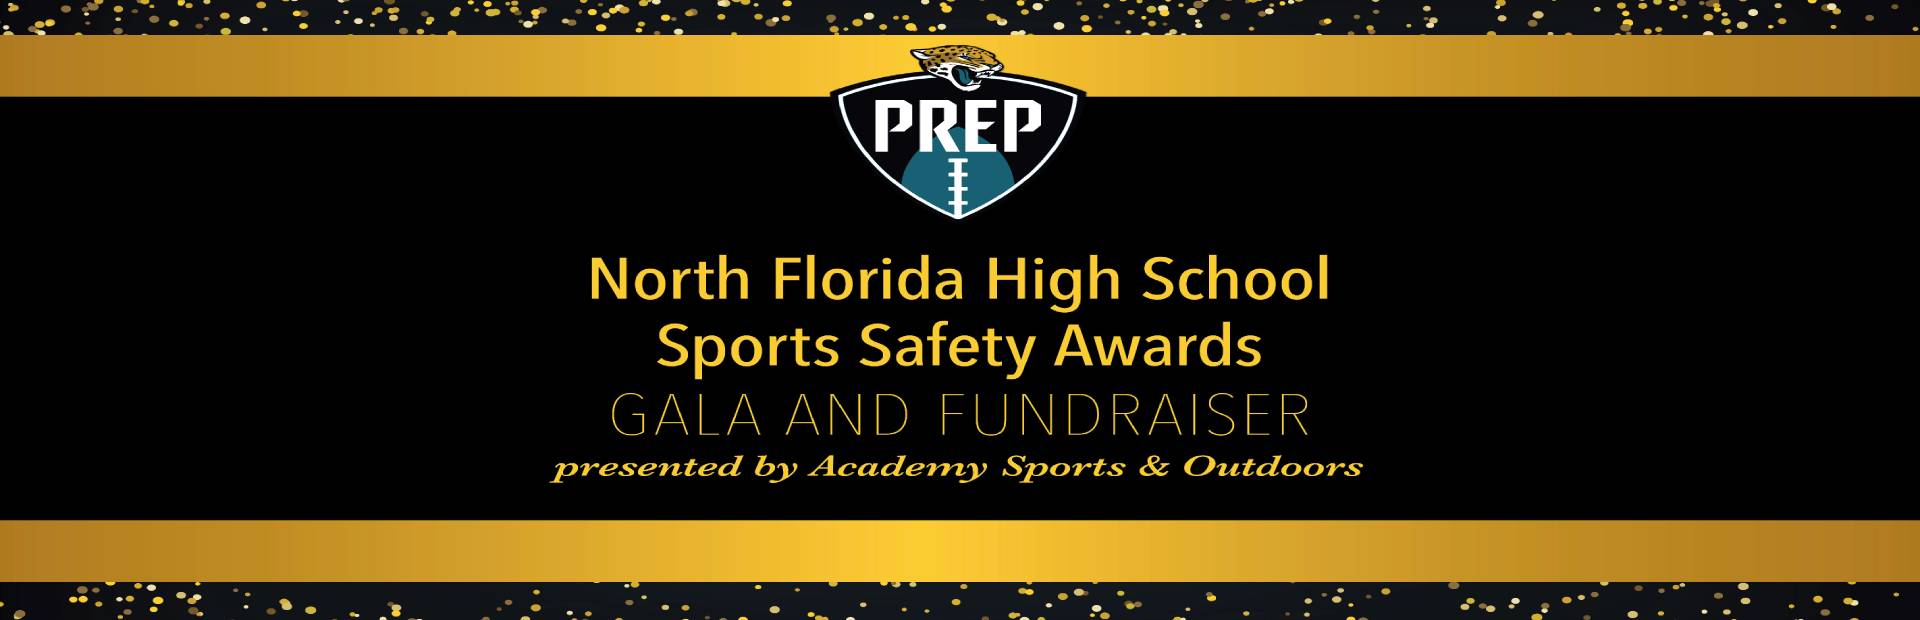 North Florida High School Sports Safety Awards Gala and Fundraiser Flyer